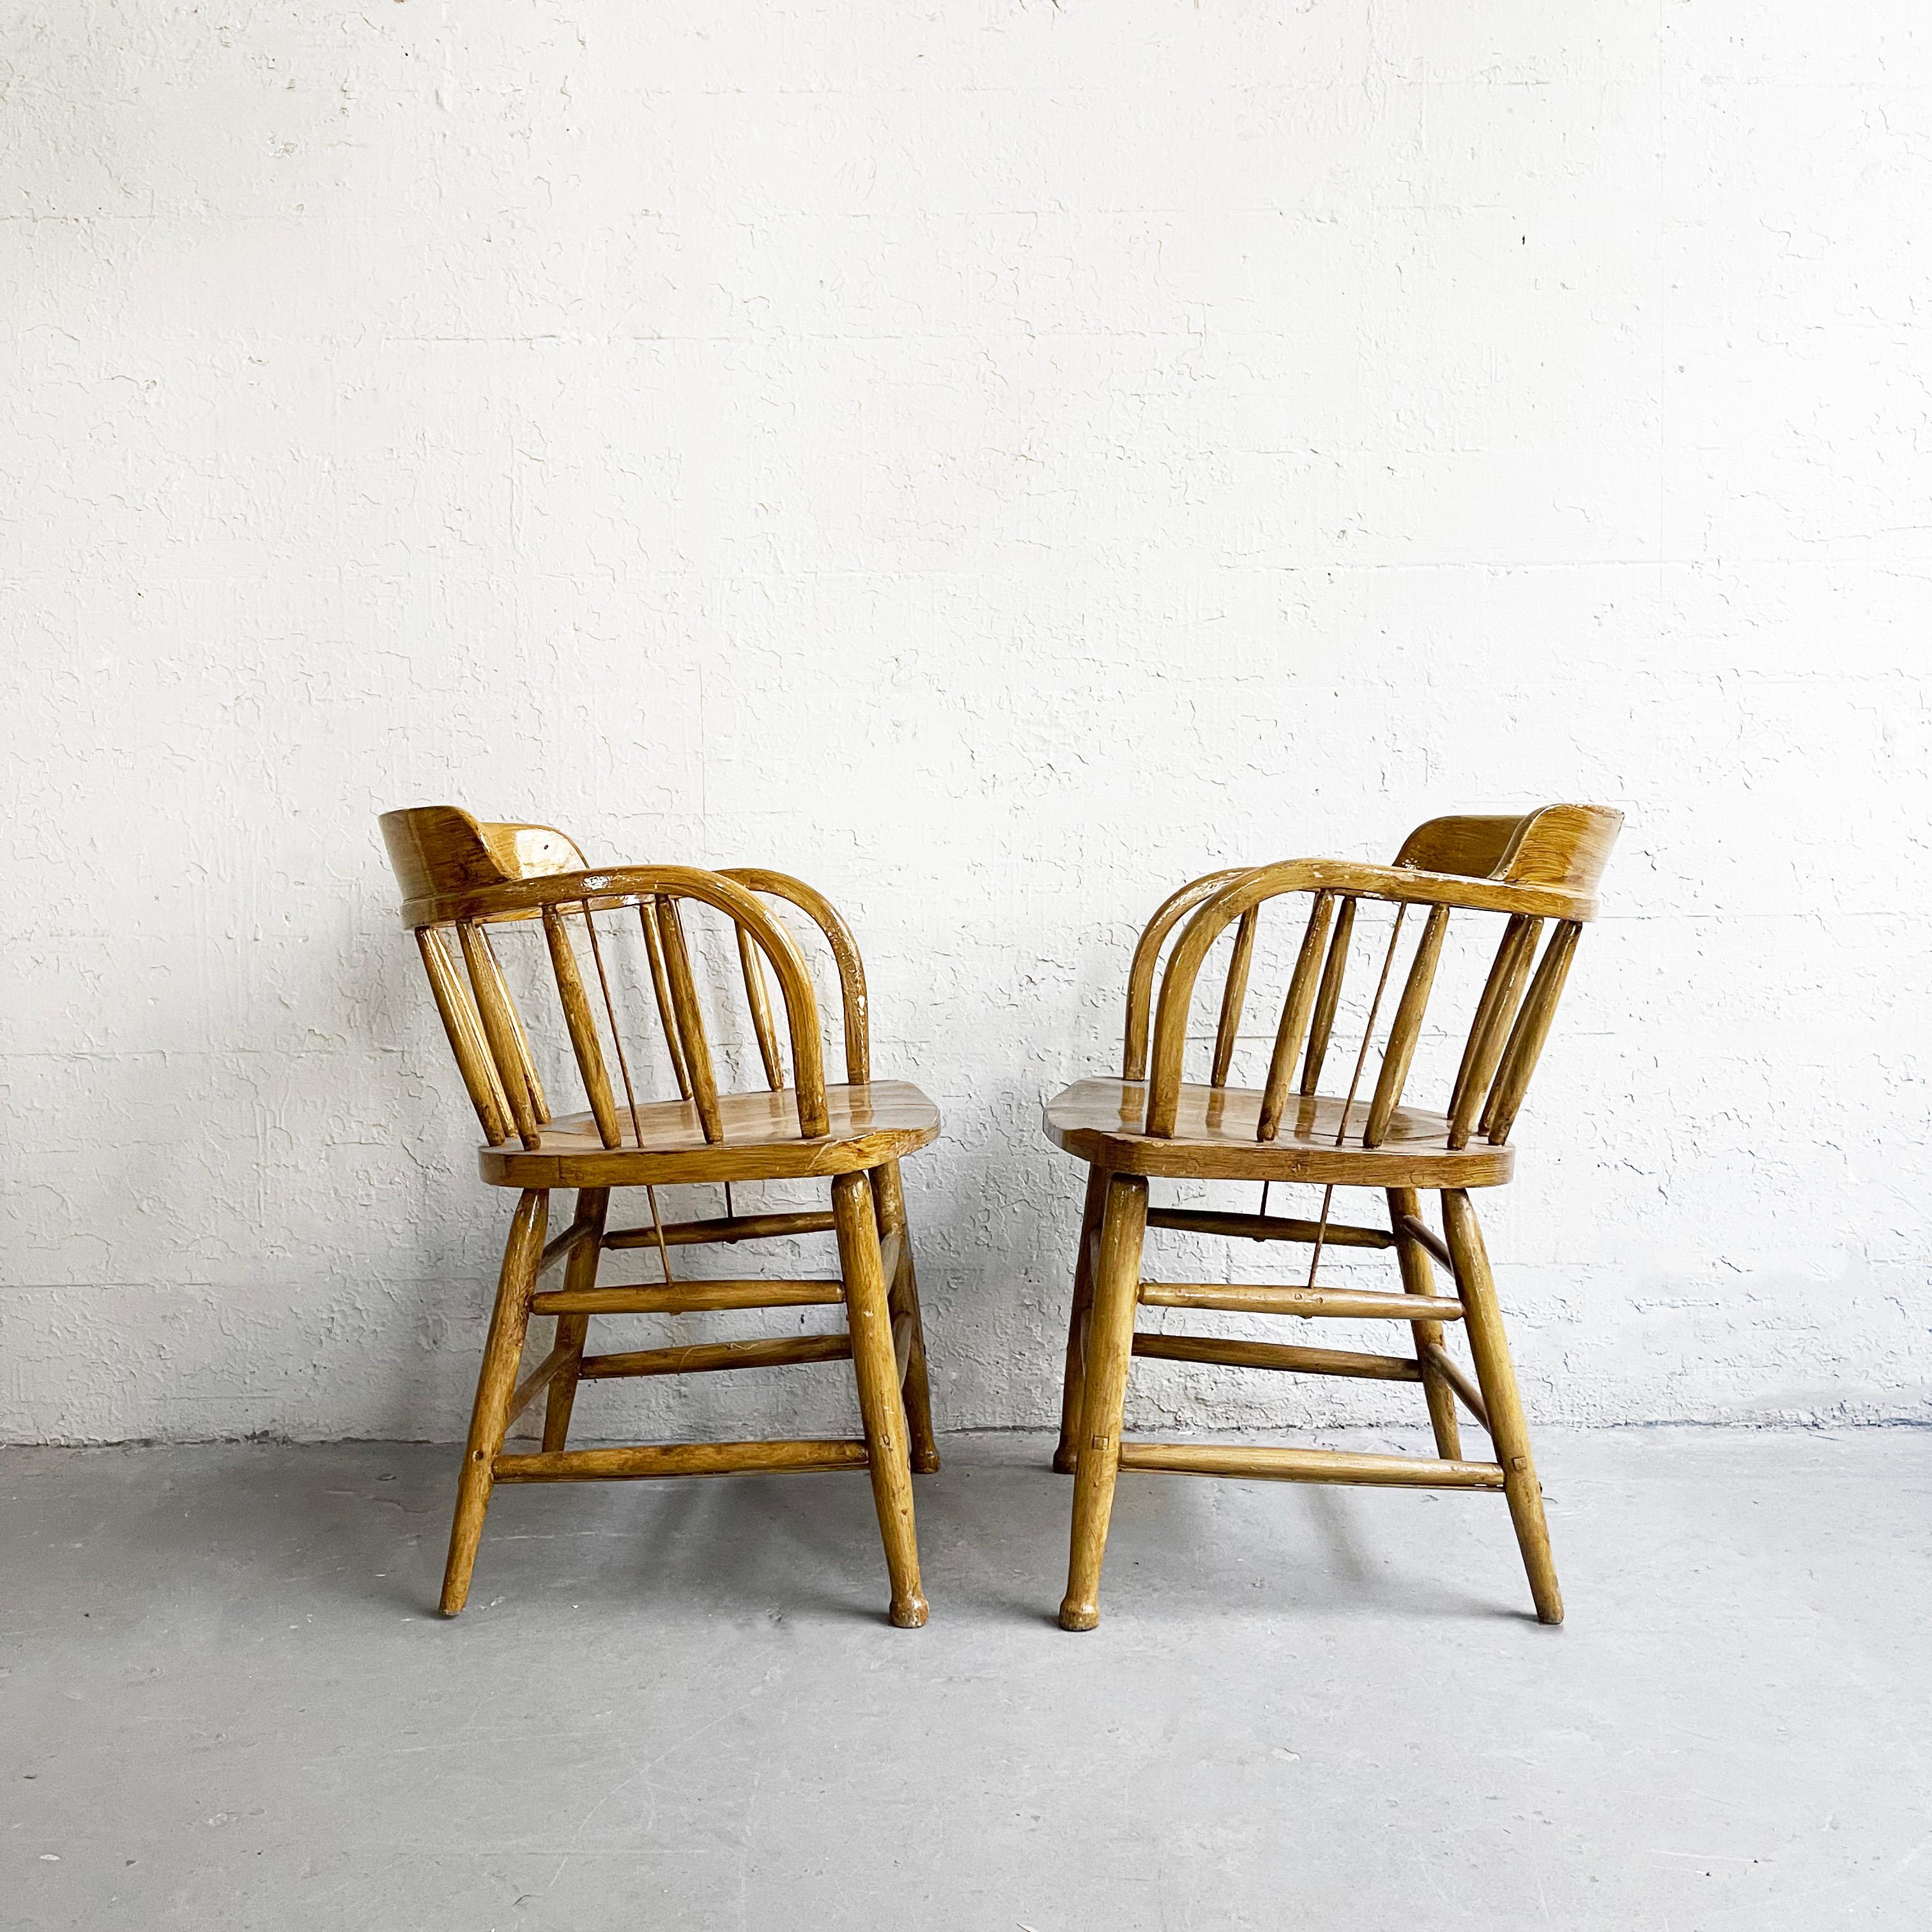 American Early 20th Century, Rustic Oak Firehouse Dining Chairs For Sale